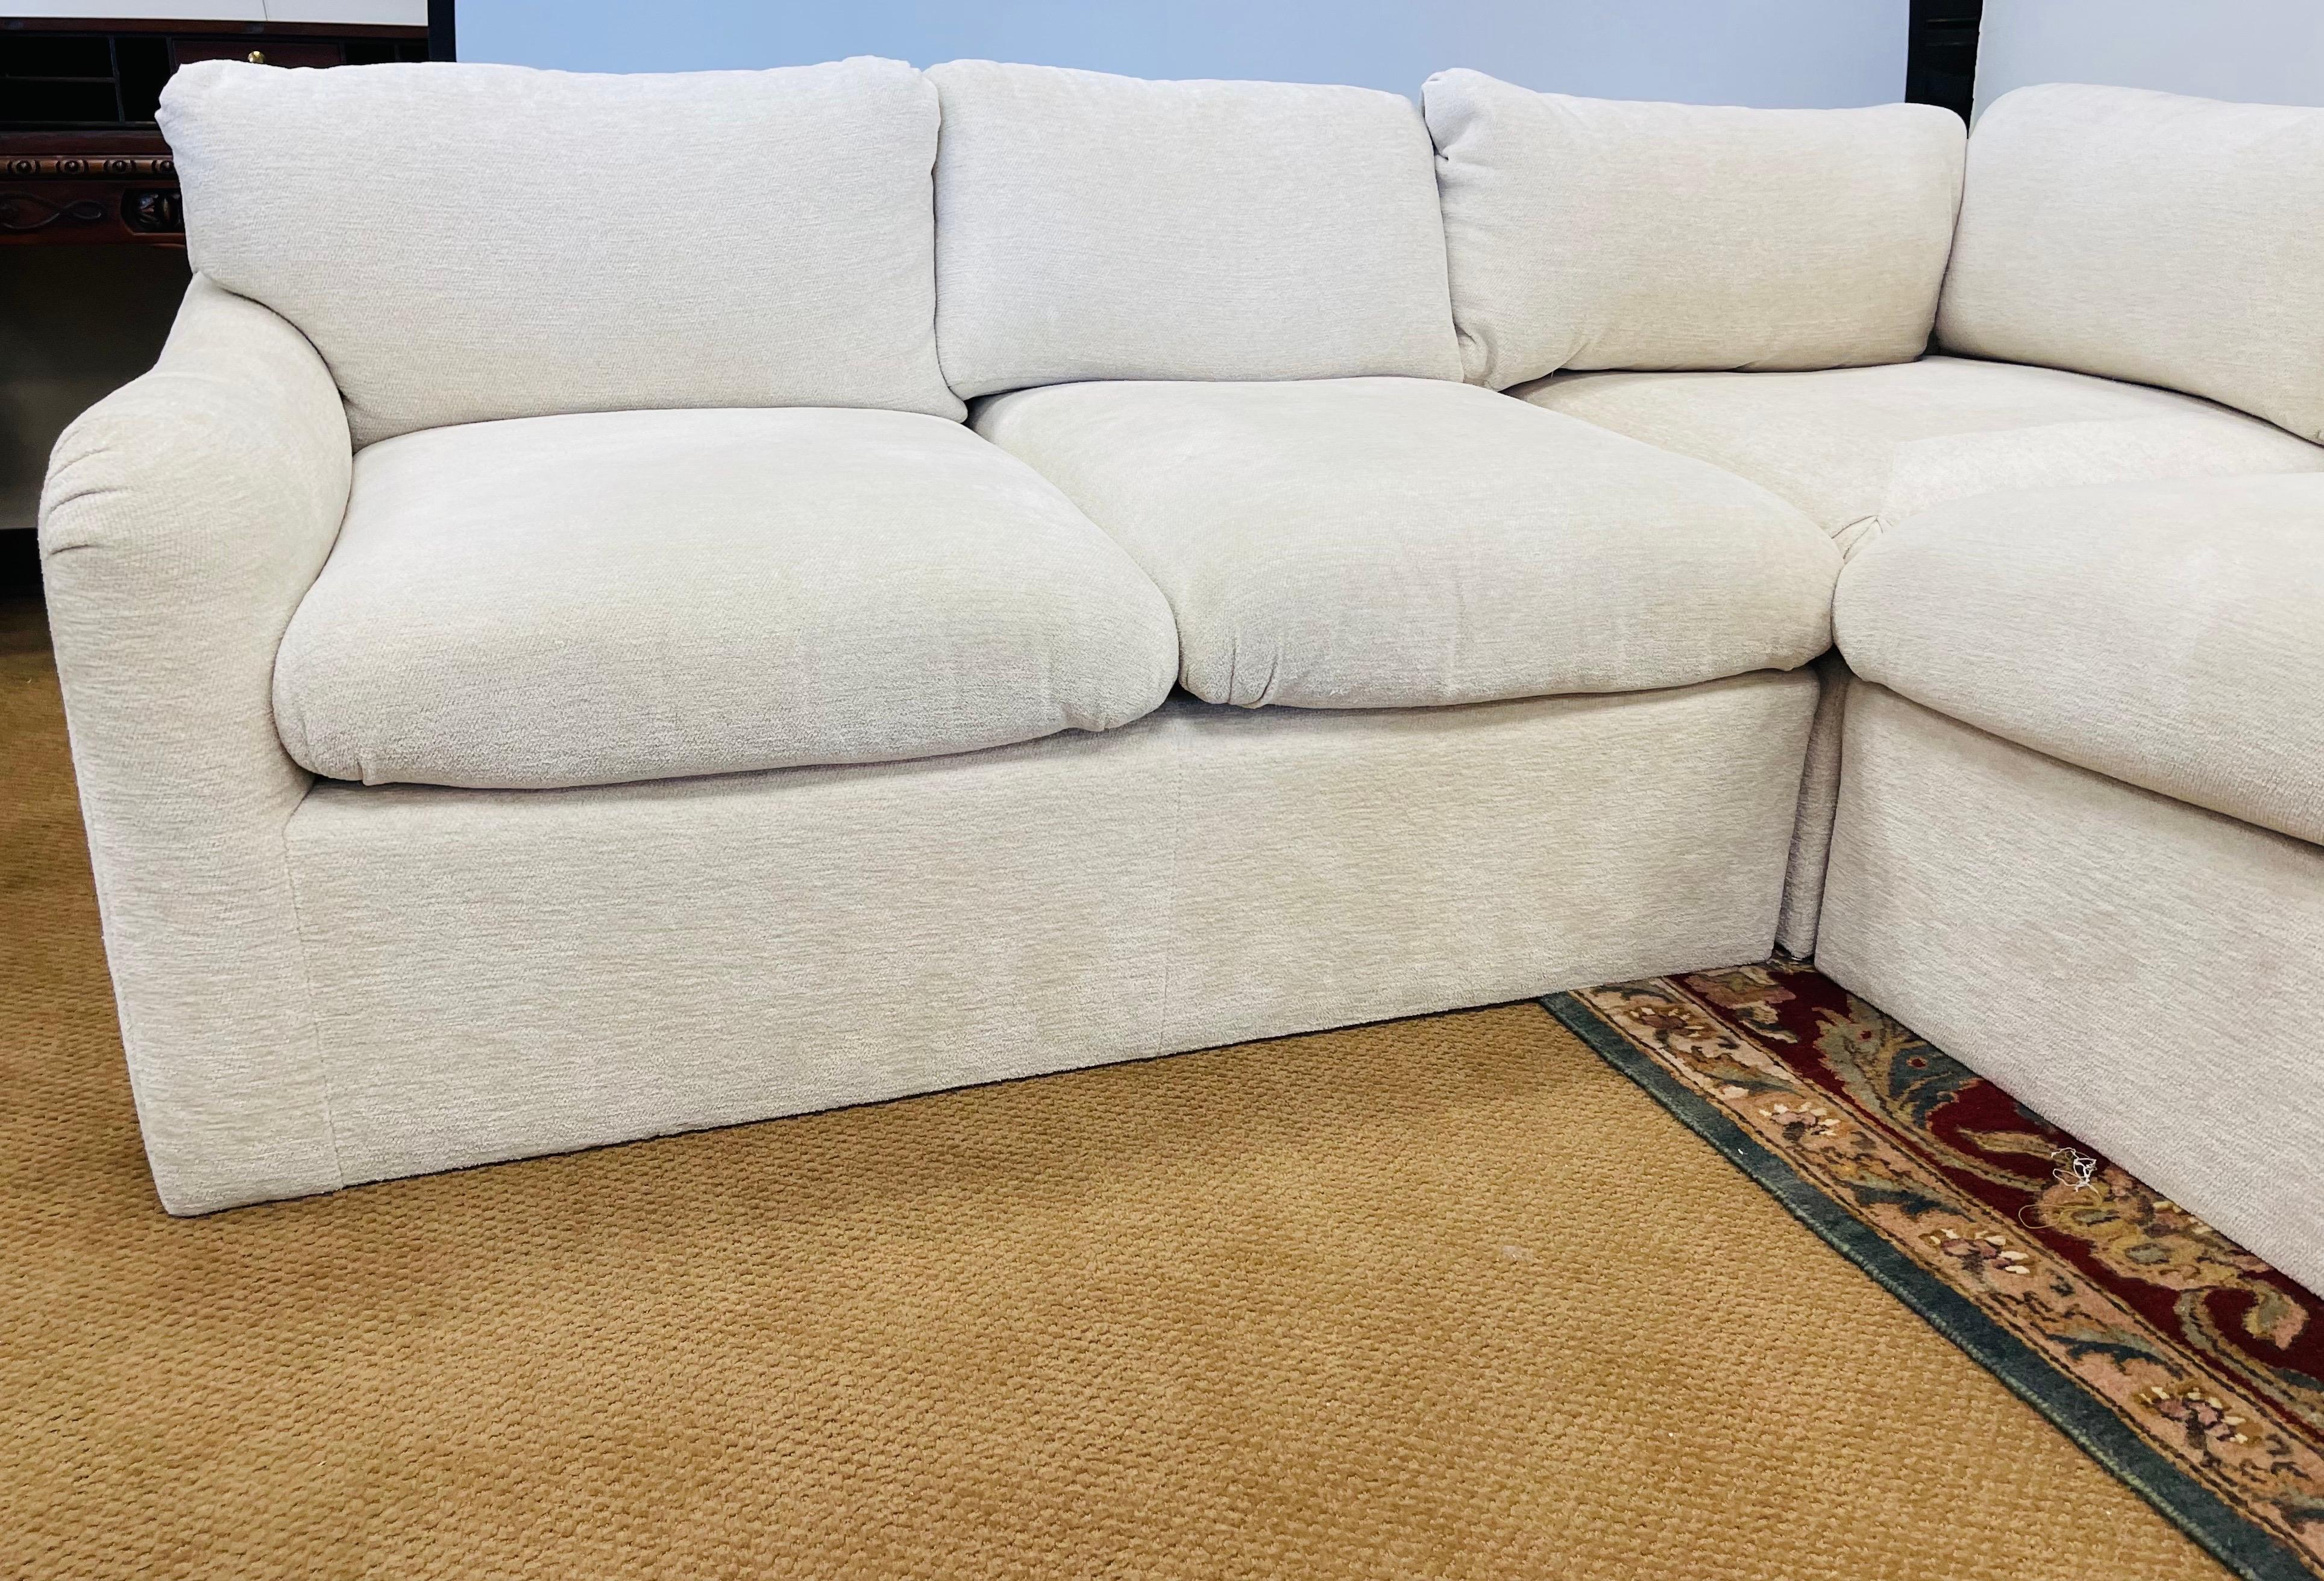 Contemporary J. Robert Scott Designer Sectional Sofa 3-Piece in L-Shape with Chenille Fabric